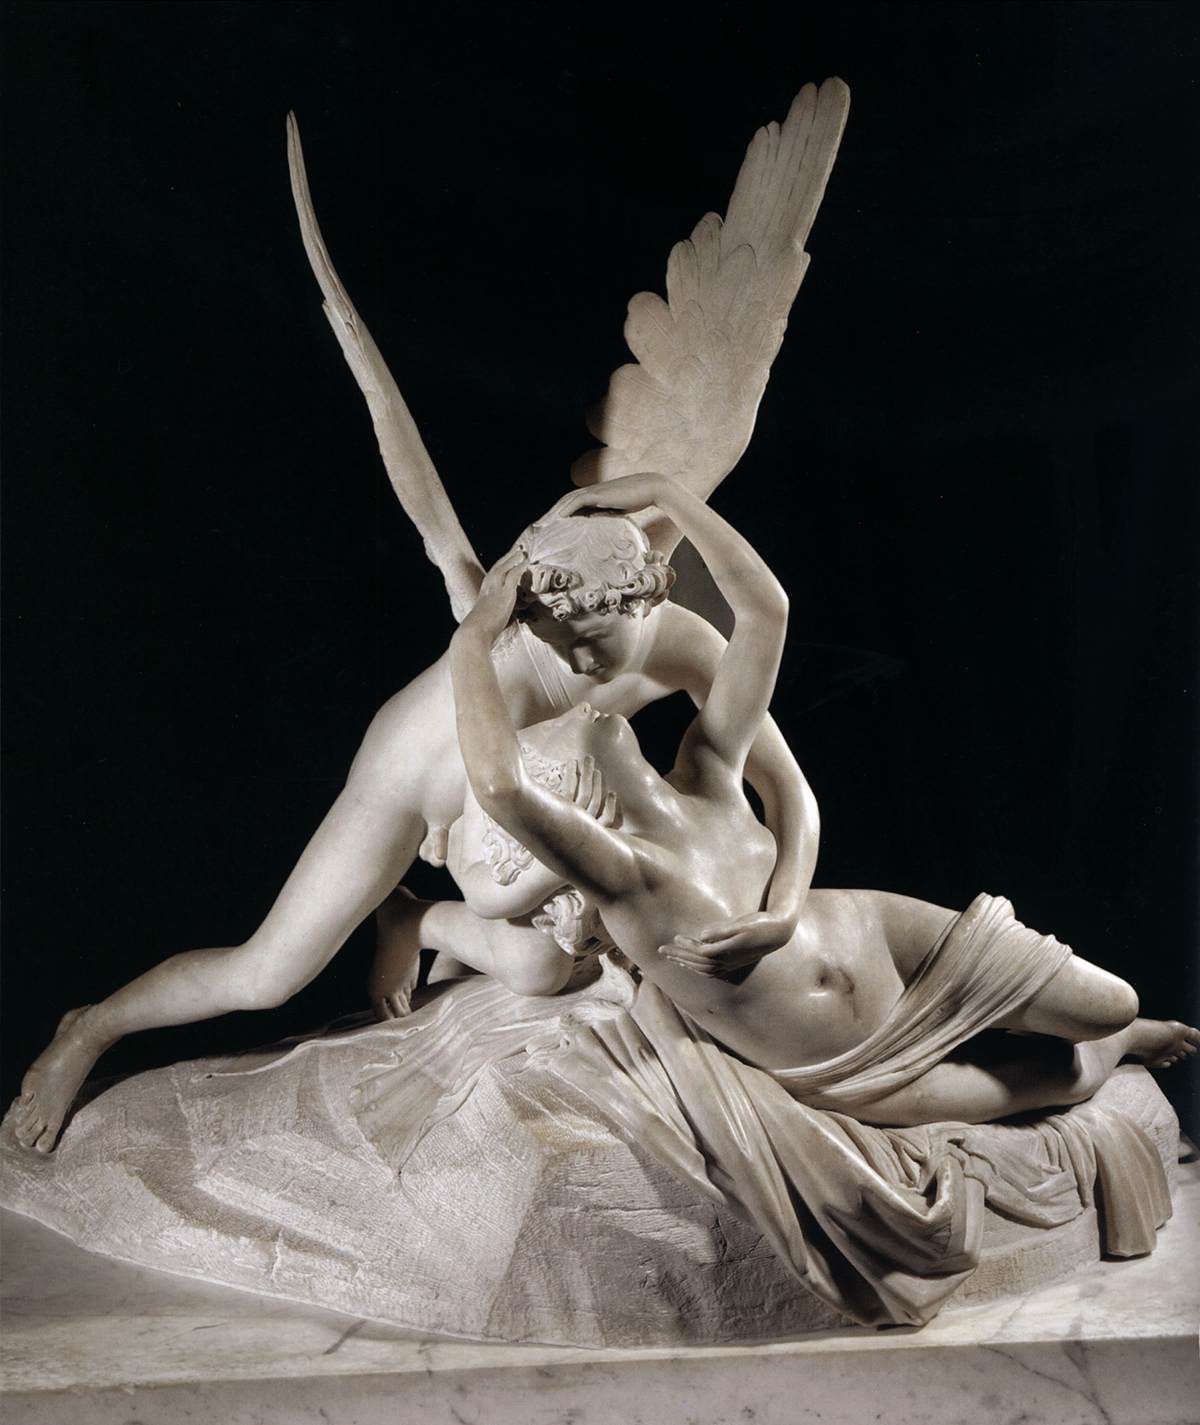 Psyche Revived by Cupid's Kiss by Antonio Canova - 1787 - 168 cm Musée du Louvre